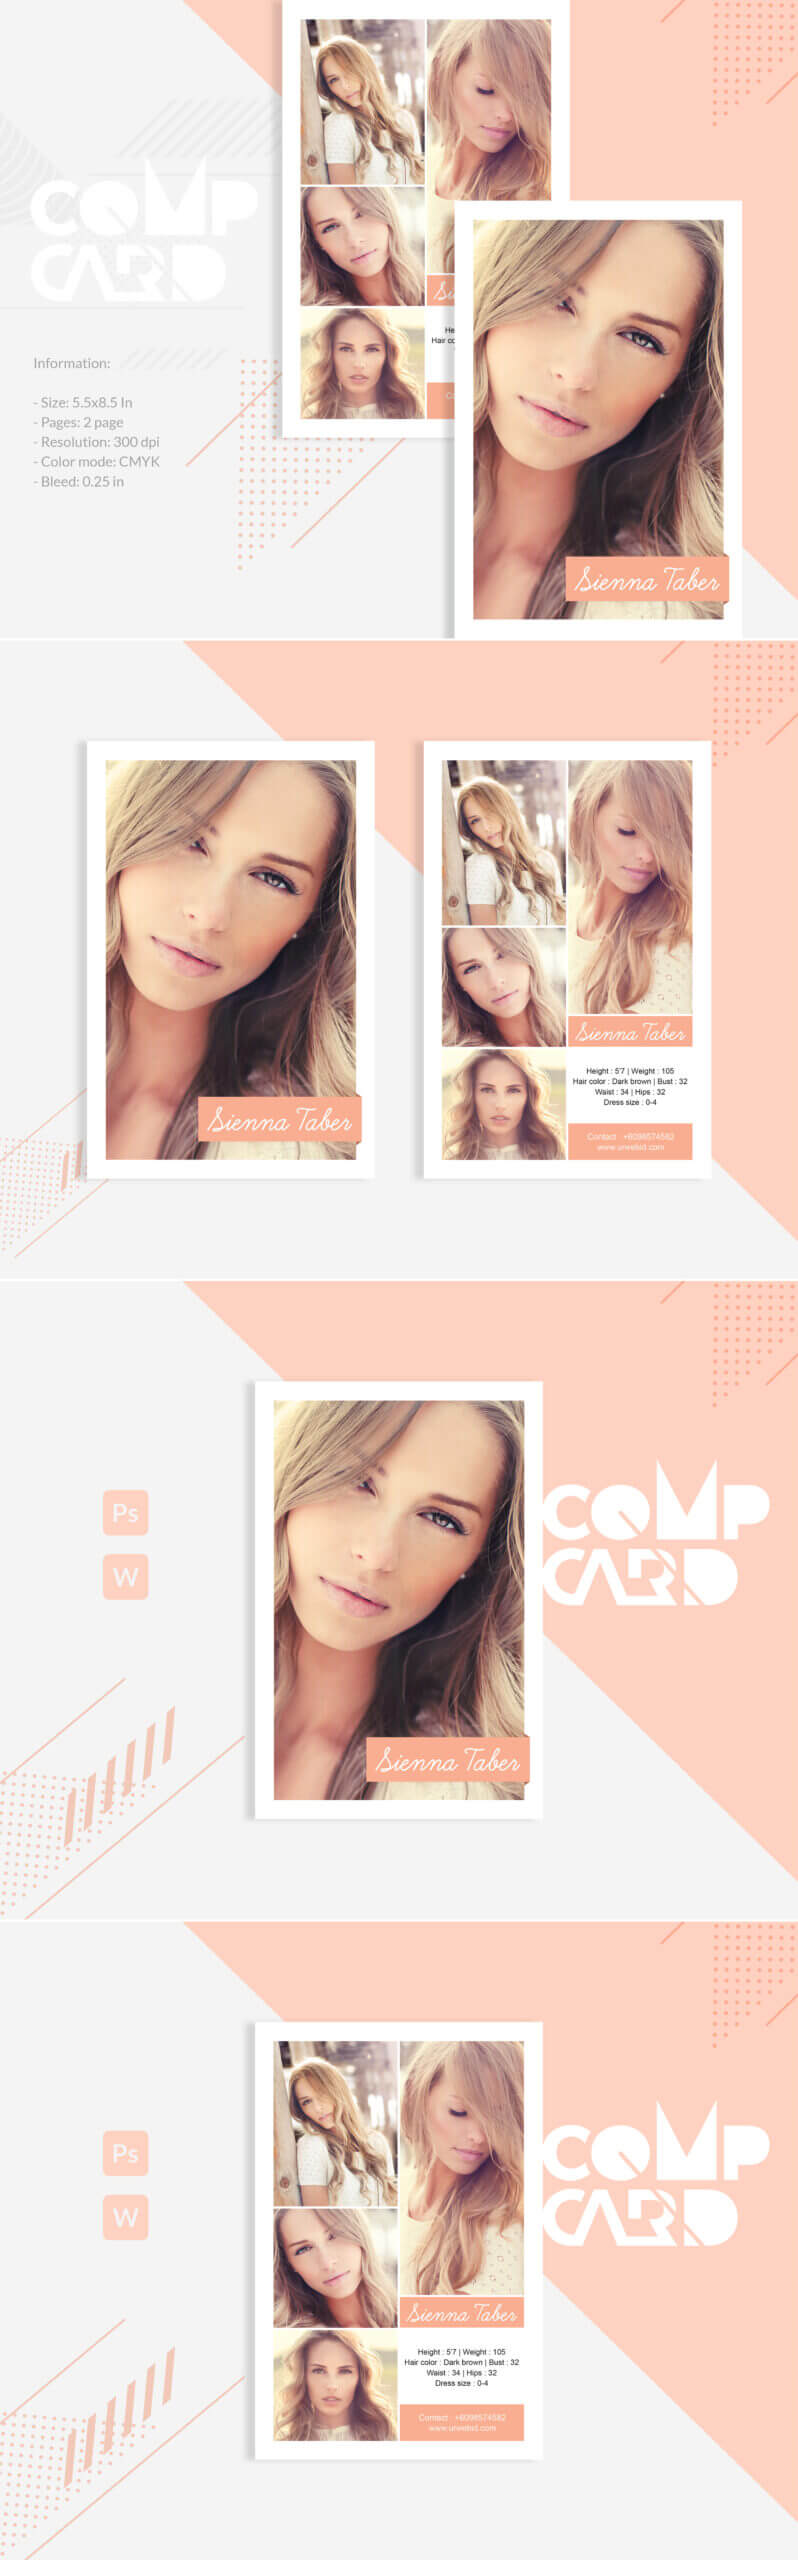 Sienna Taber - Modeling Comp Card Corporate Identity Template Within Comp Card Template Download